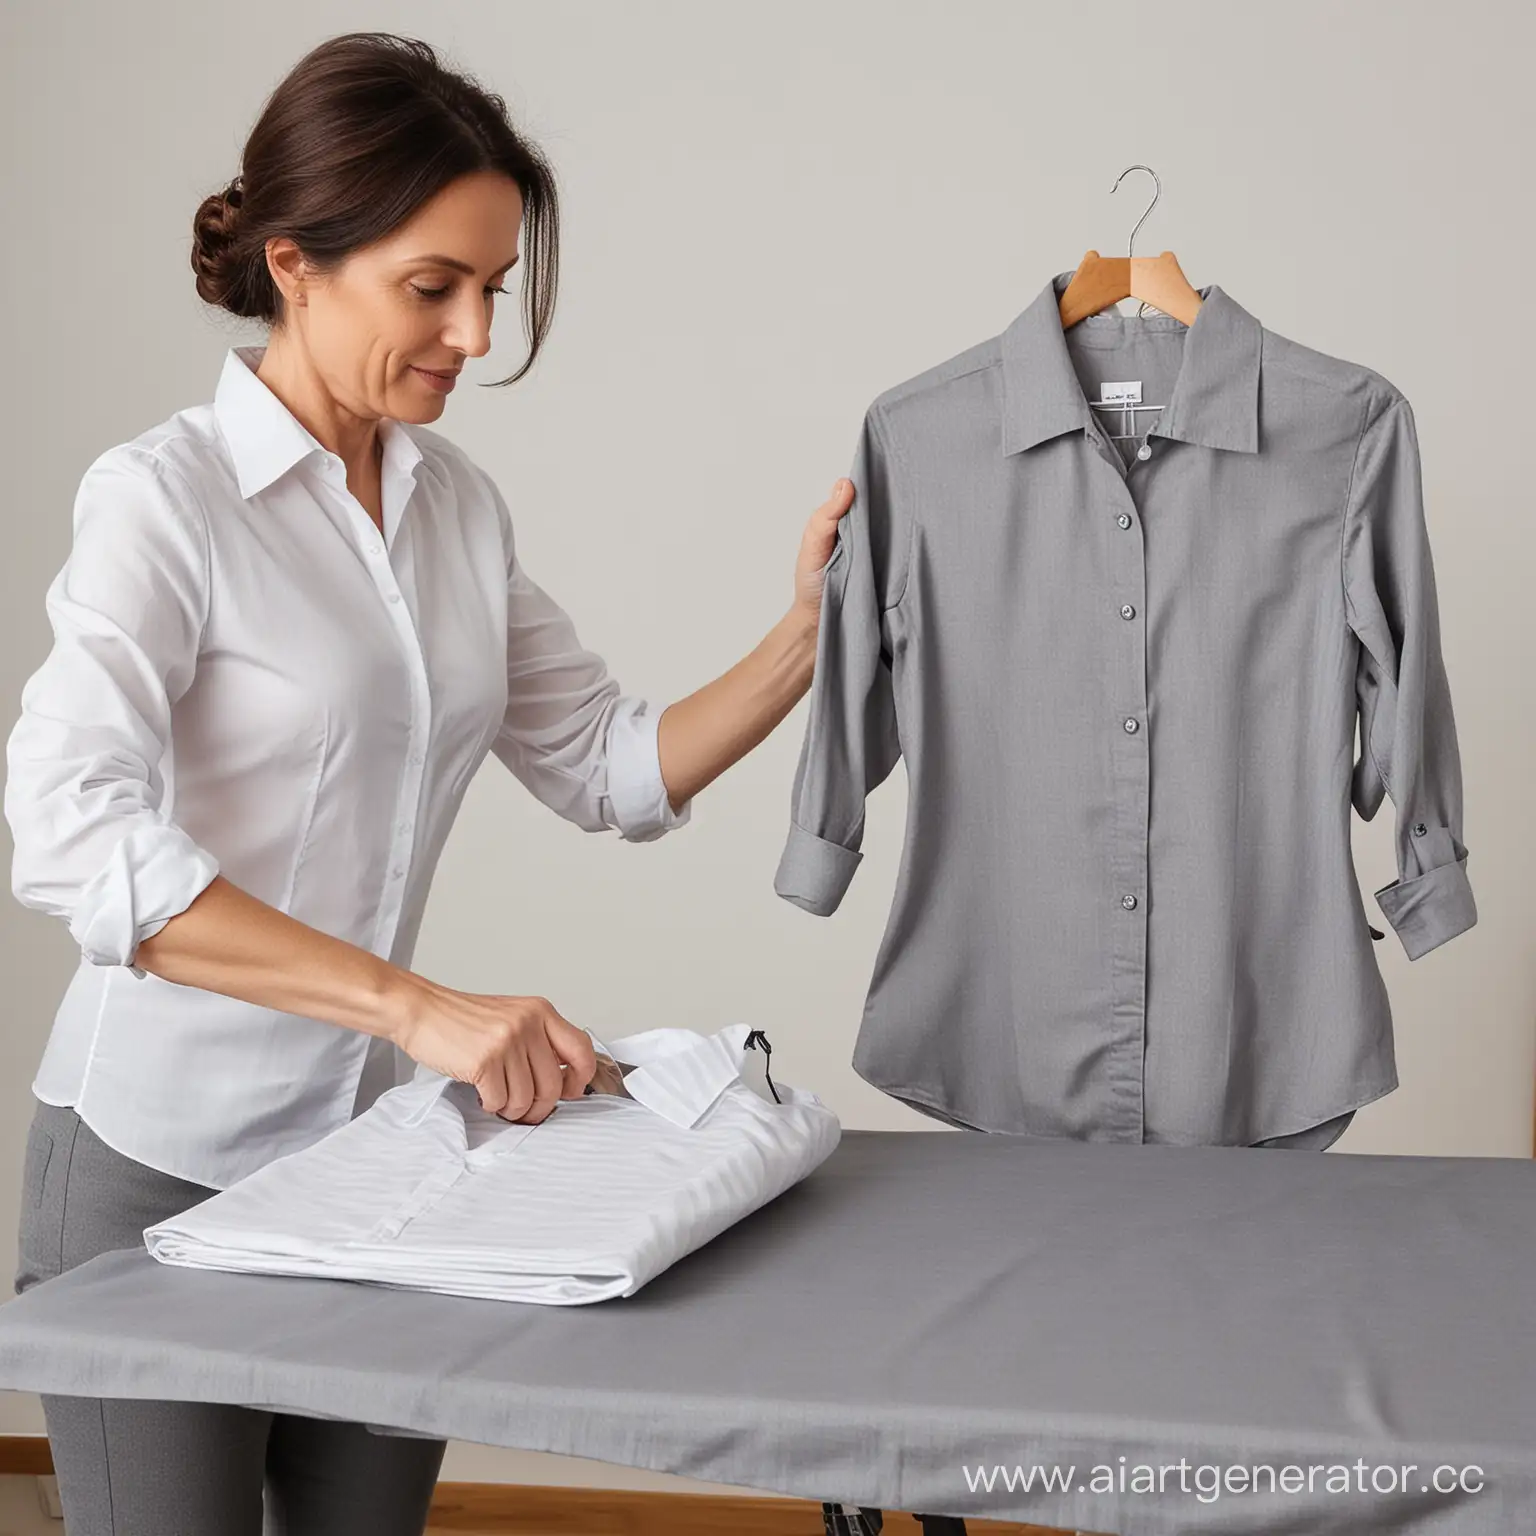 MiddleAged-Woman-Ironing-Blouse-on-Gray-Ironing-Board